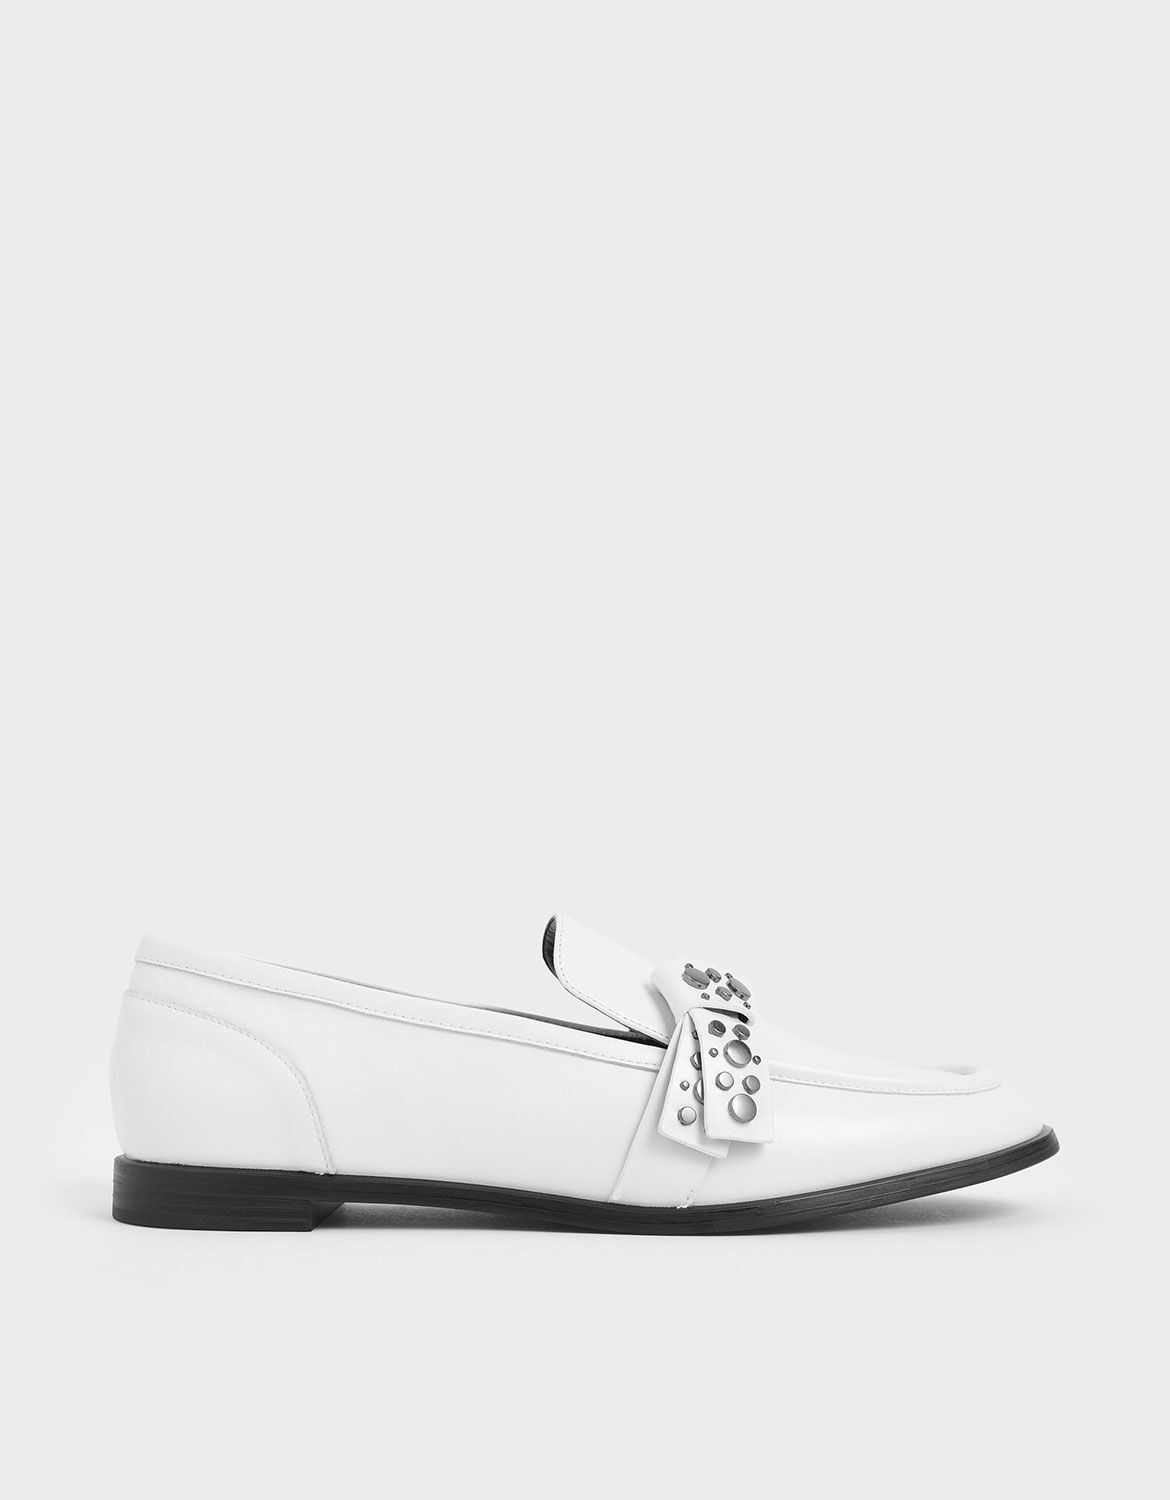 white loafer sneakers